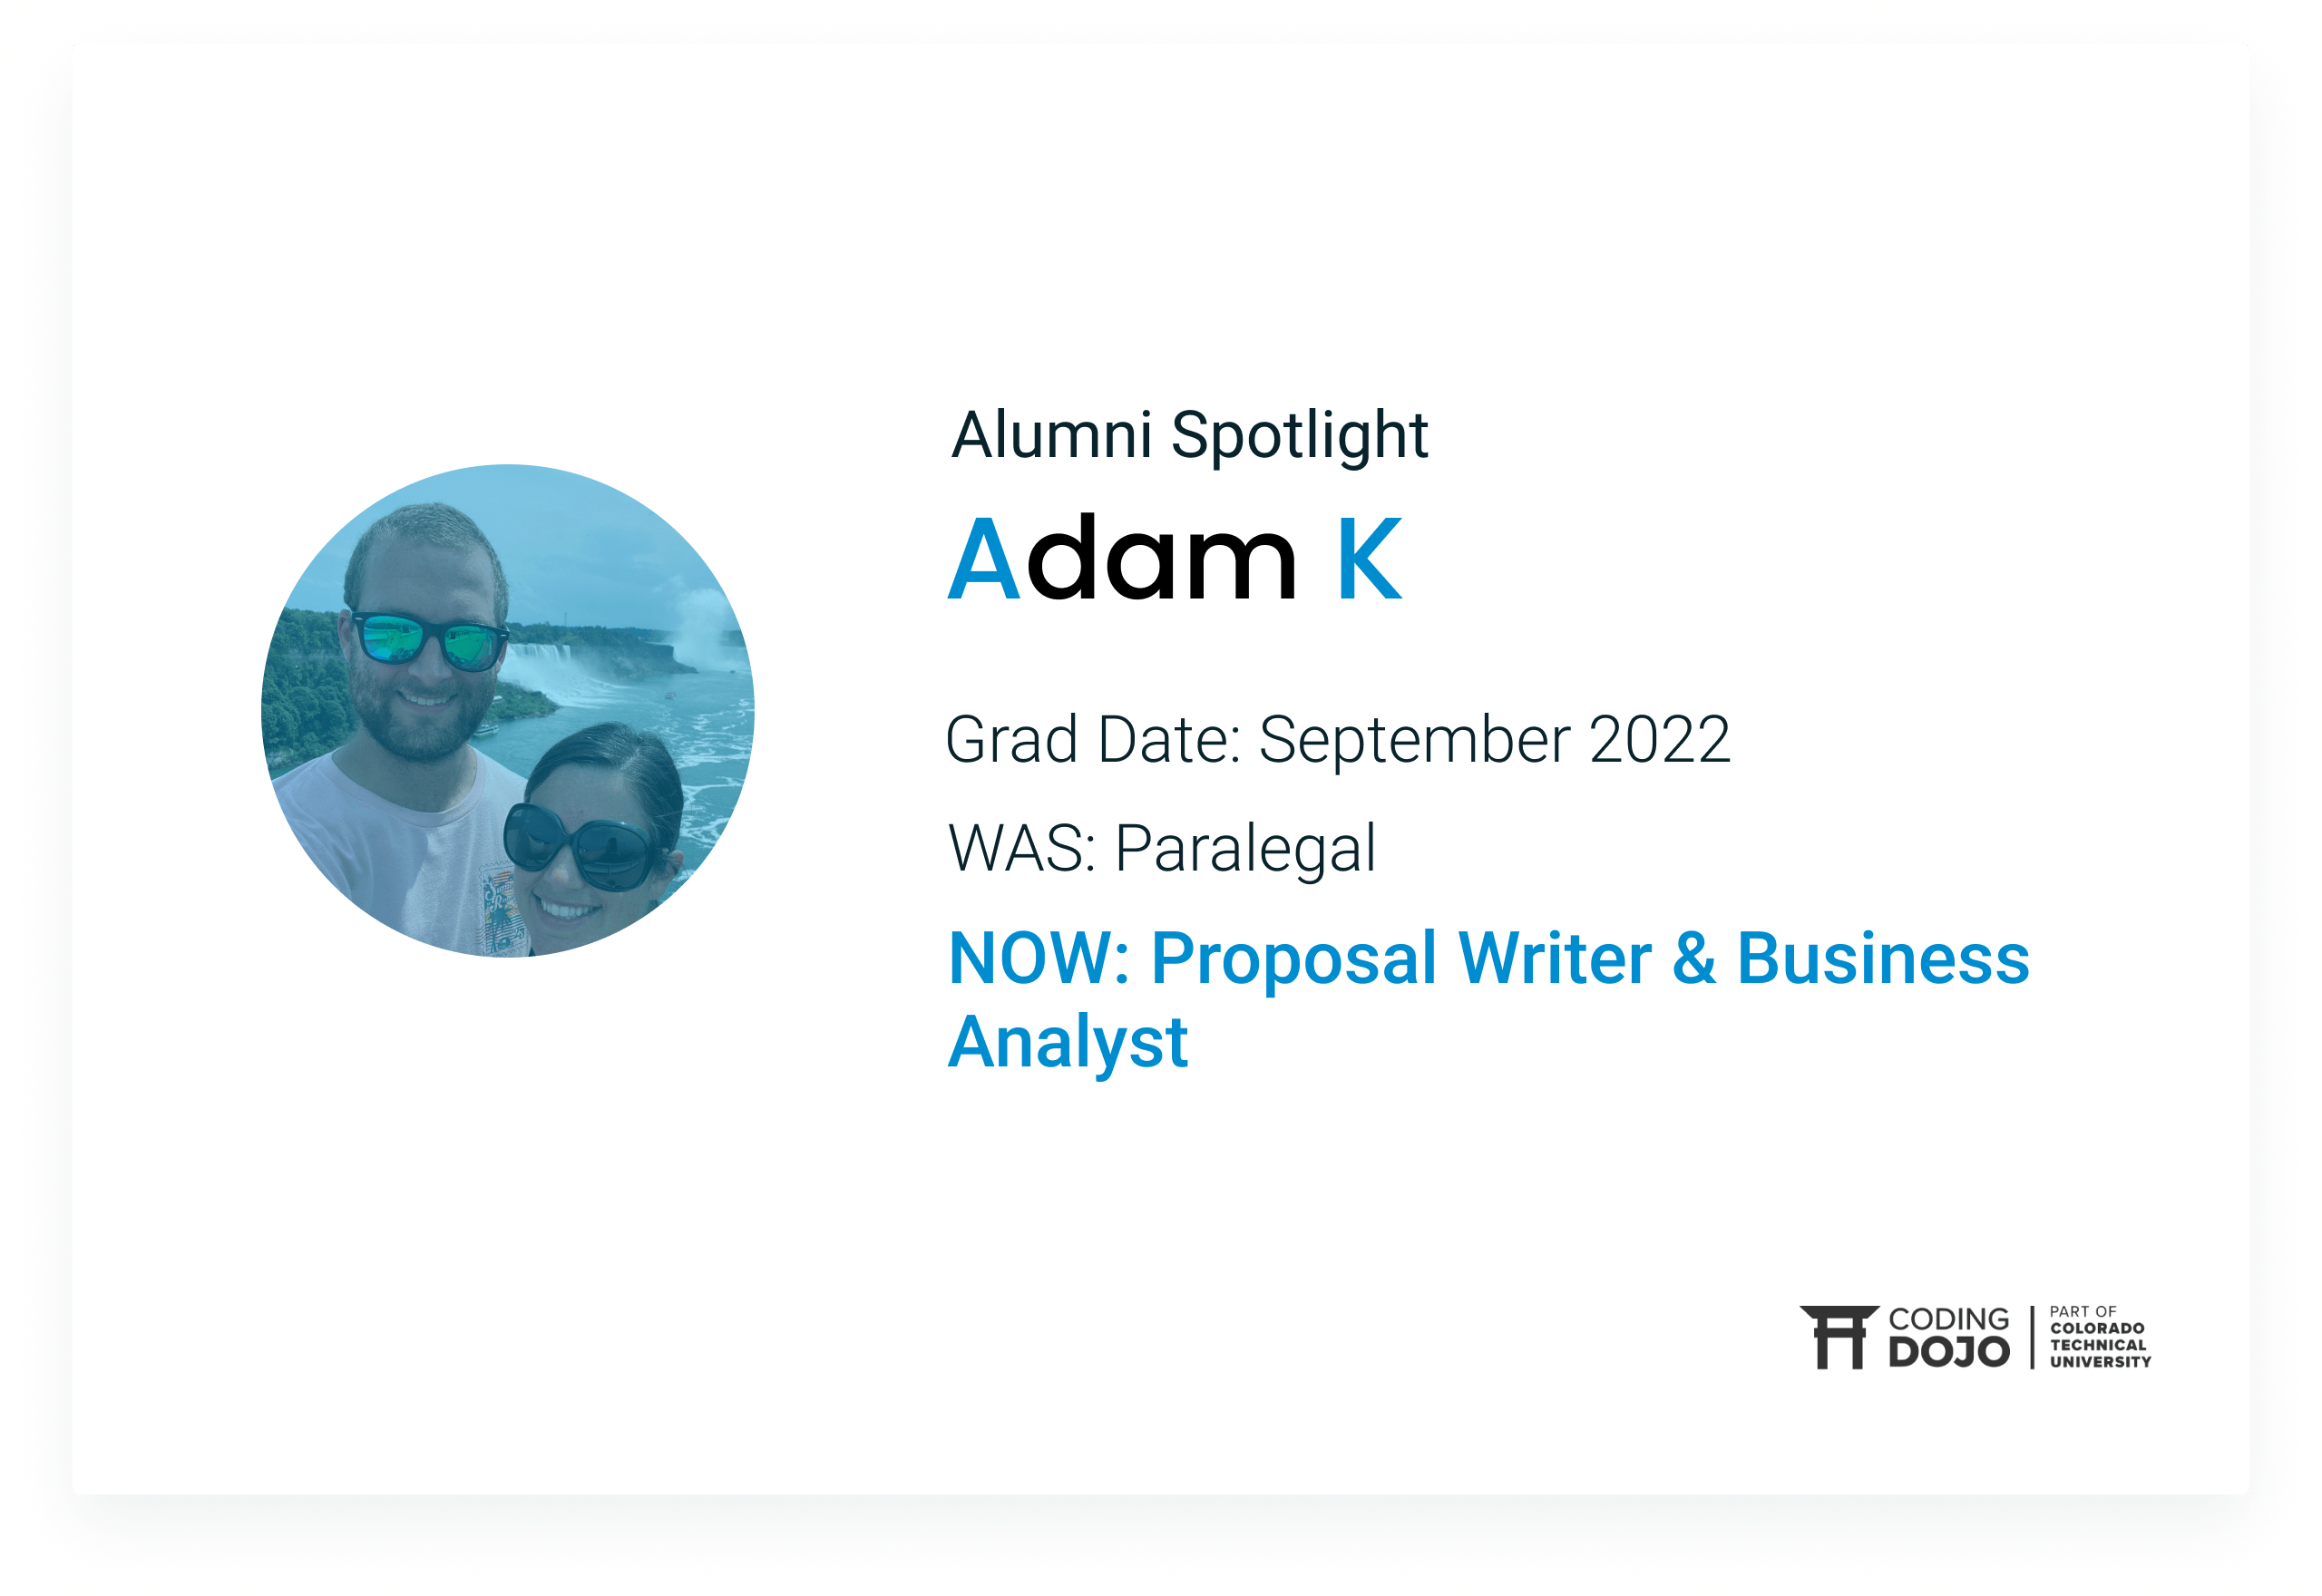 From Paralegal to Proposal Writer & Business Analyst | How Alumni Adam K Changed His Career Path